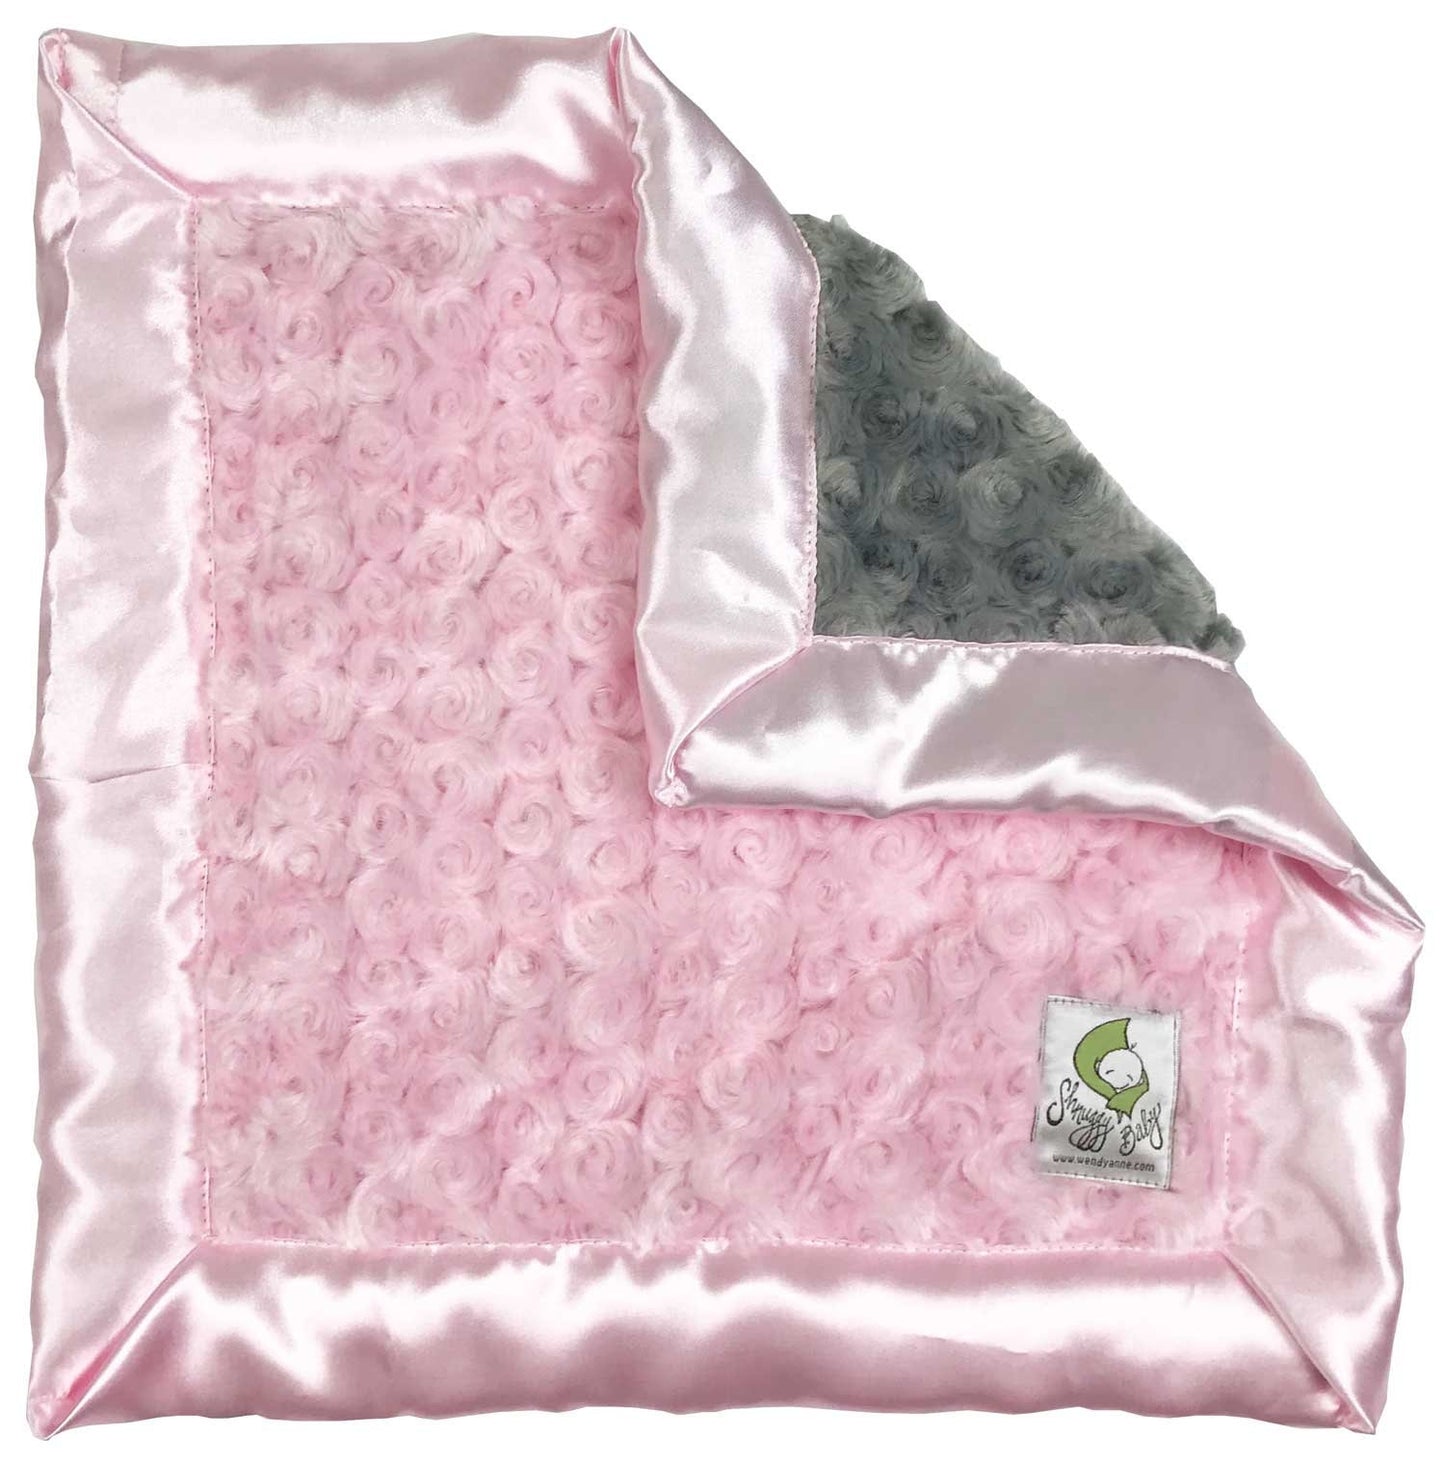 Shnuggy Baby Blanket - Choose Color and Size - Lovey, Stroller or Crib